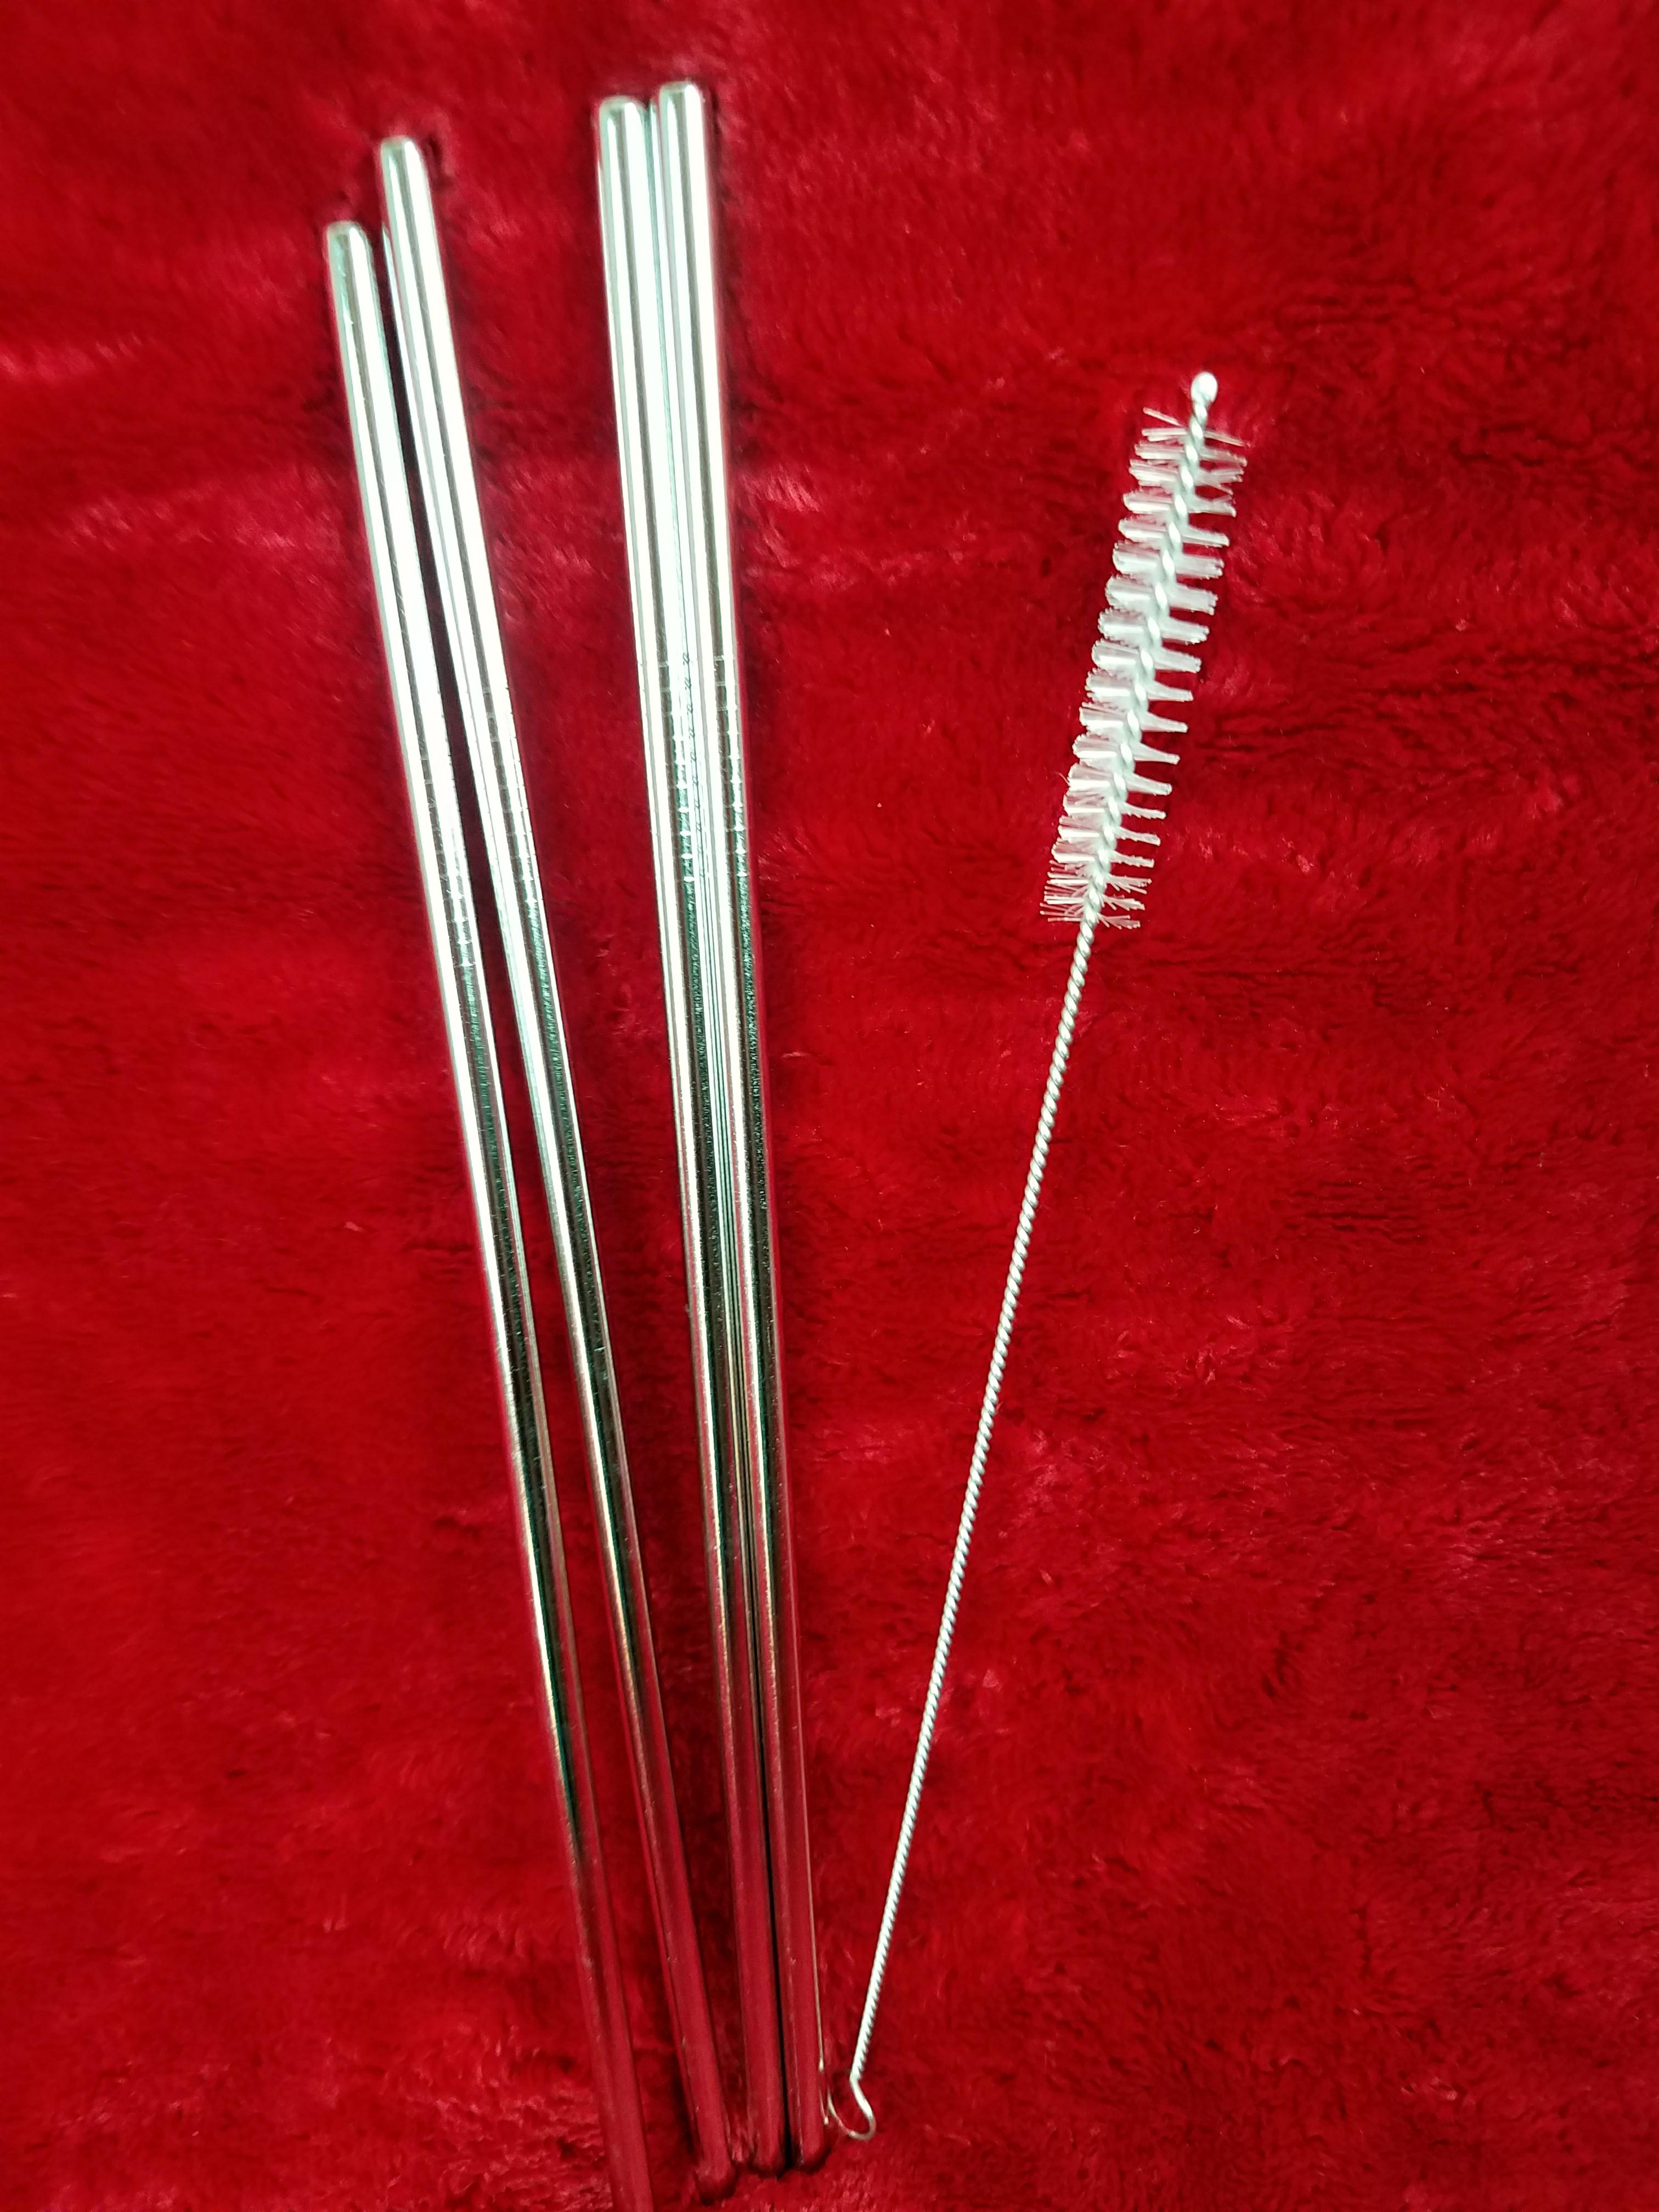 This set of 4 Stainless Steel Drinking Straws is fantastic!  Reusable, Responsible, Eco-Friendly, & made of Premium Quality Materials!  The metal even keeps the straws cold!